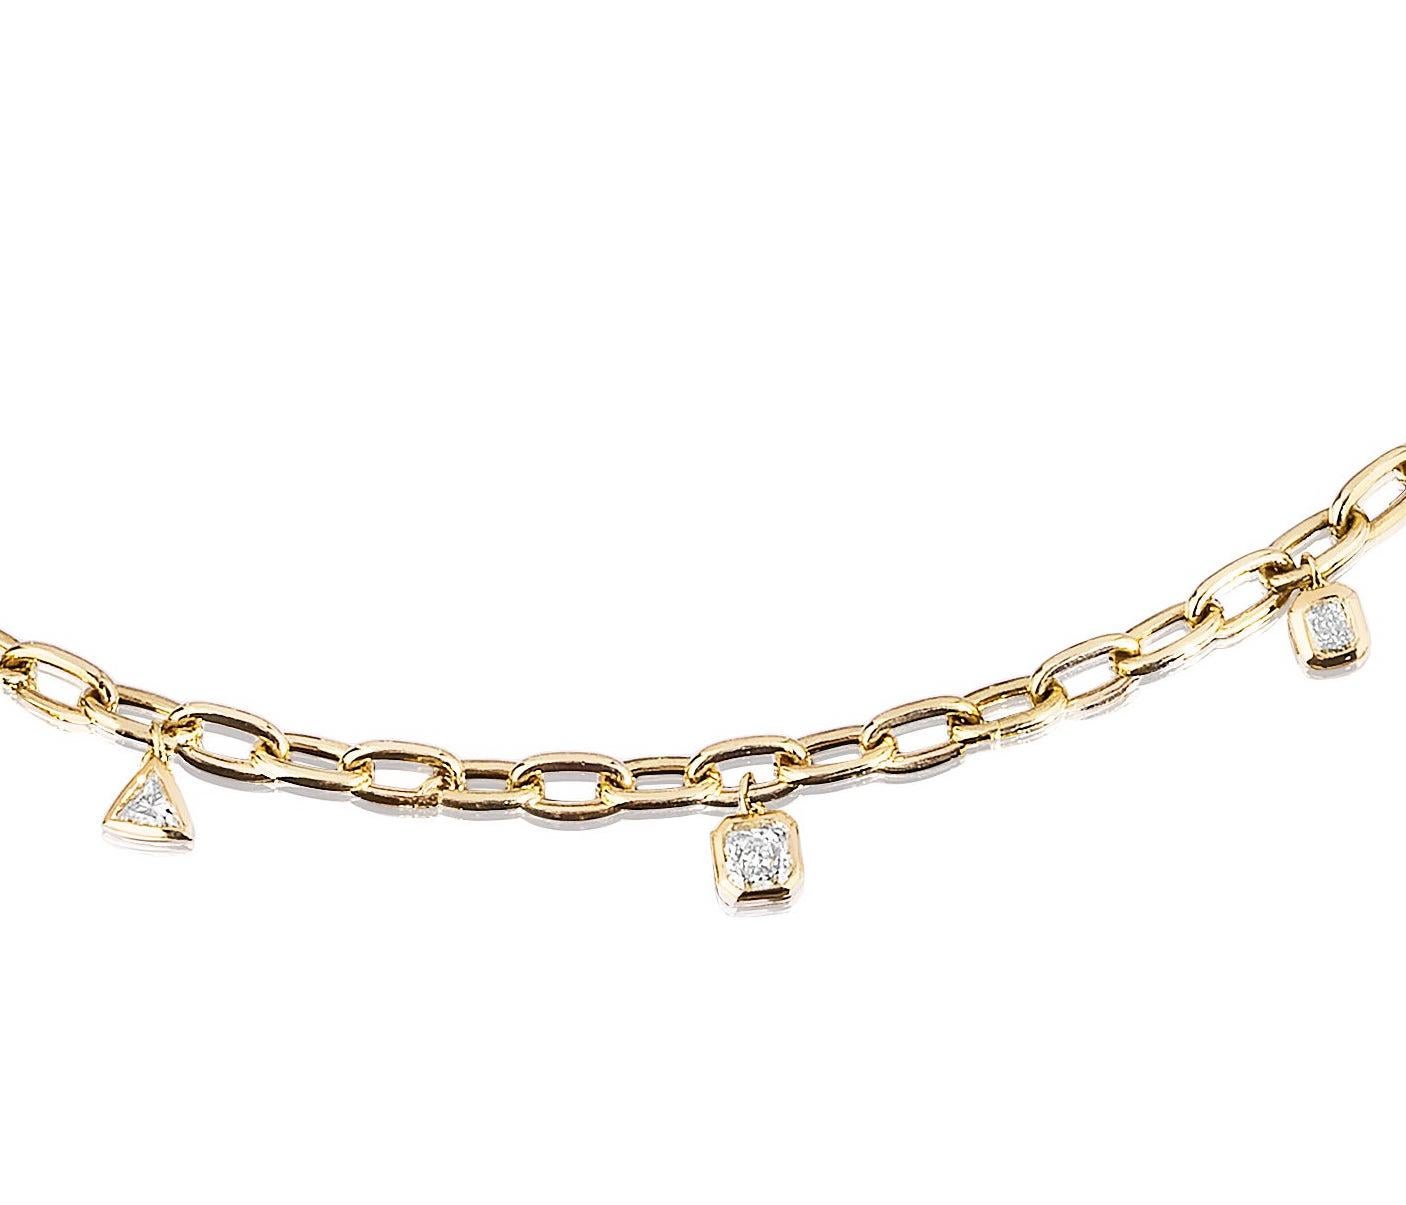 Solid Link bracelet set with 6 Multi Shaped White and Yellow Diamonds in Bezel Set Charm Style.
Great for Stacking with a watch a bangle/bracelet or with multiple of these Bracelets as shown.
1.33 Carats.
18 Karat Yellow Gold.
Lobster Claw